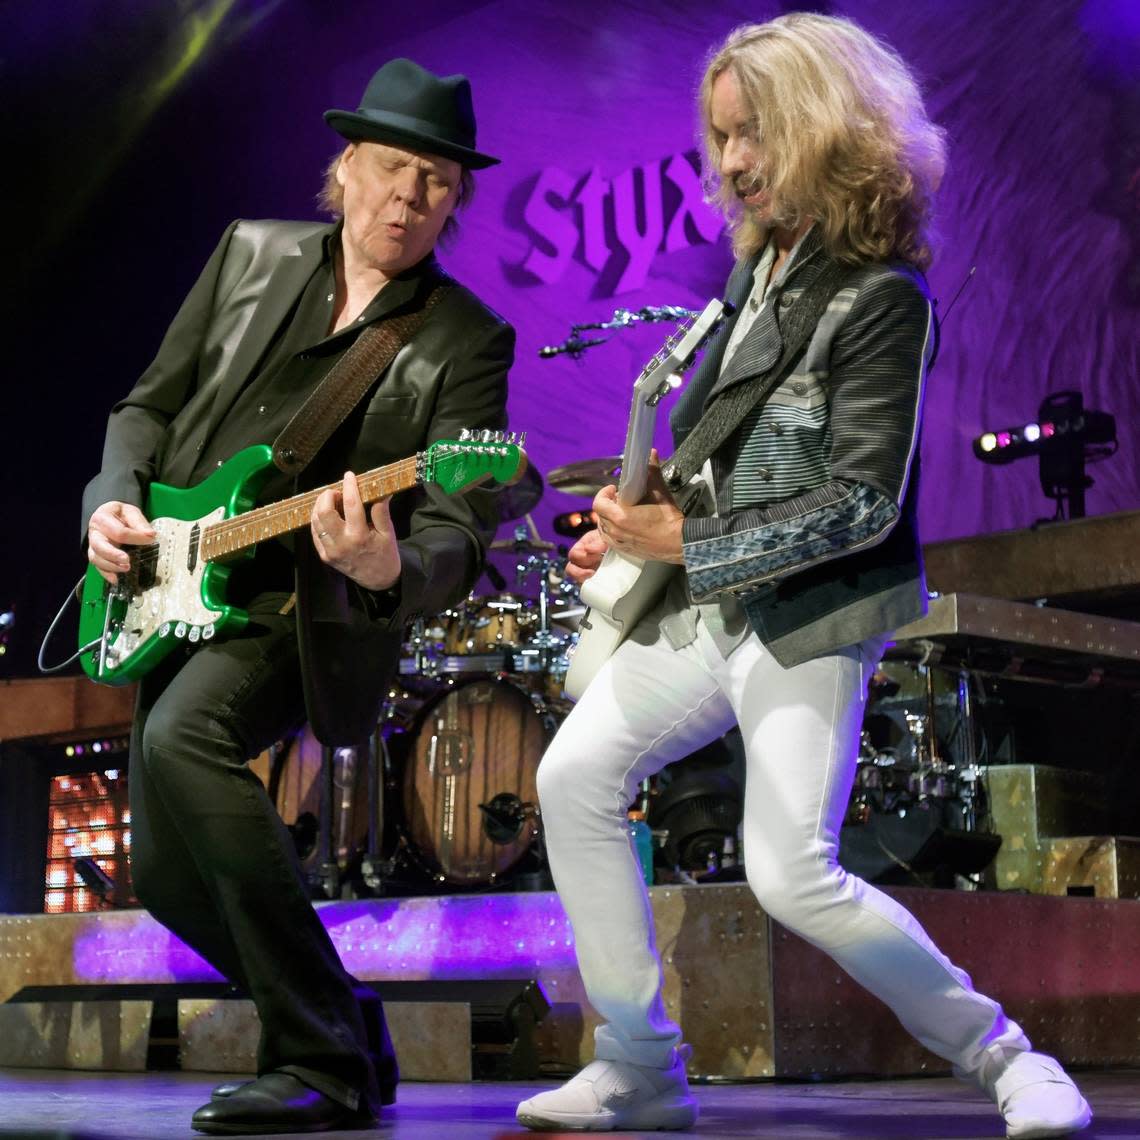 Styx’s James Young and Tommy Shaw jam together at Raleigh, N.C.’s Coastal Credit Union Music Pavilion at Walnut Creek, Wednesday night, Aug. 10, 2022.